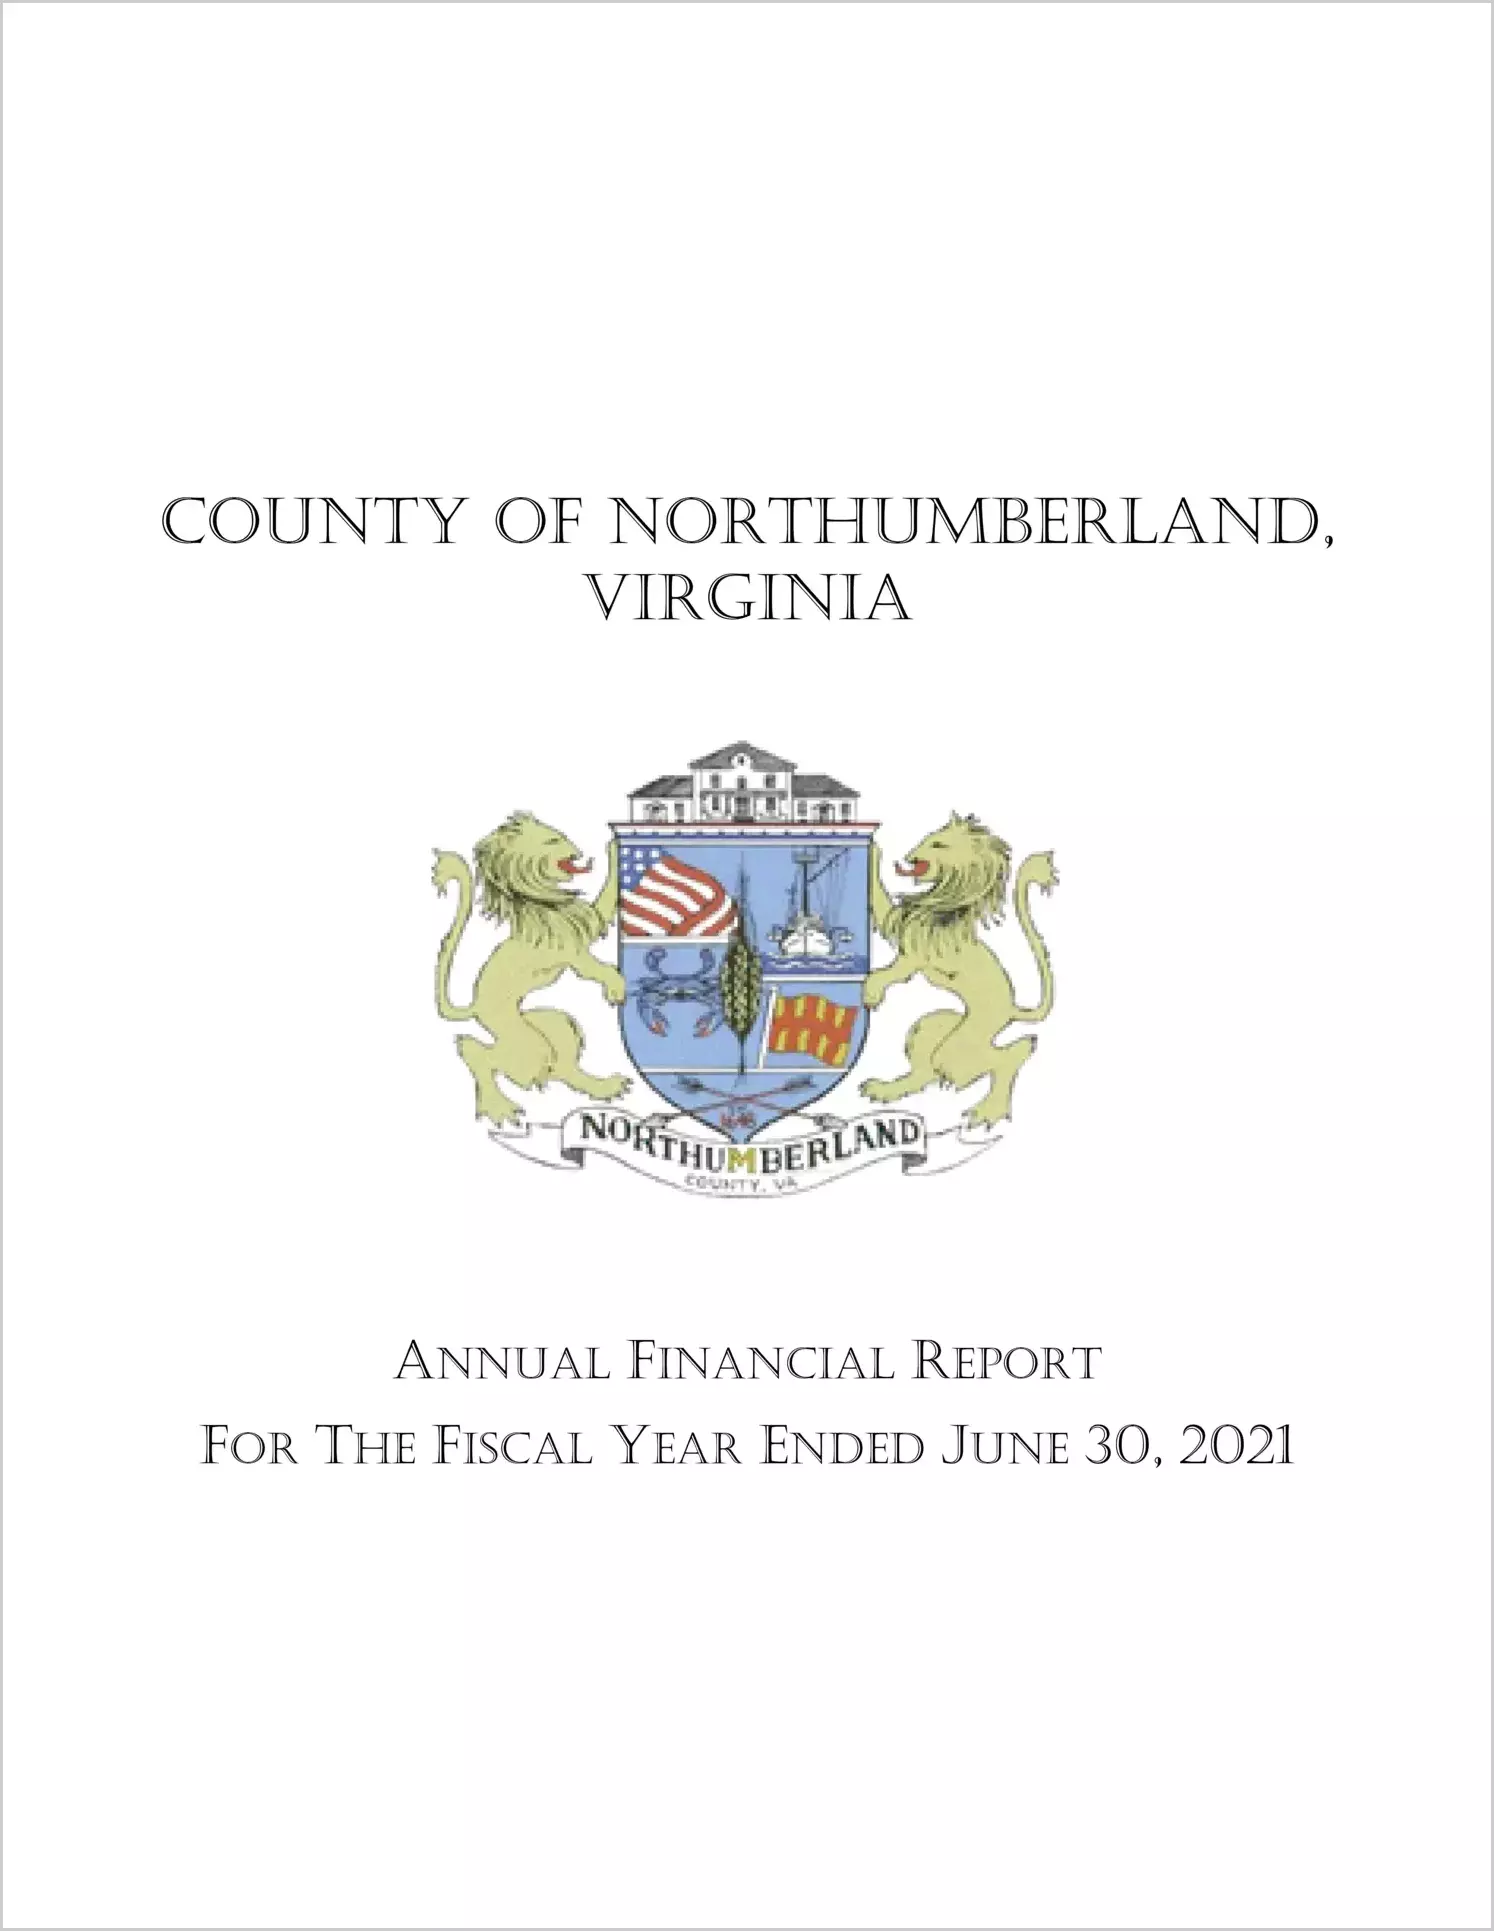 2021 Annual Financial Report for County of Northumberland